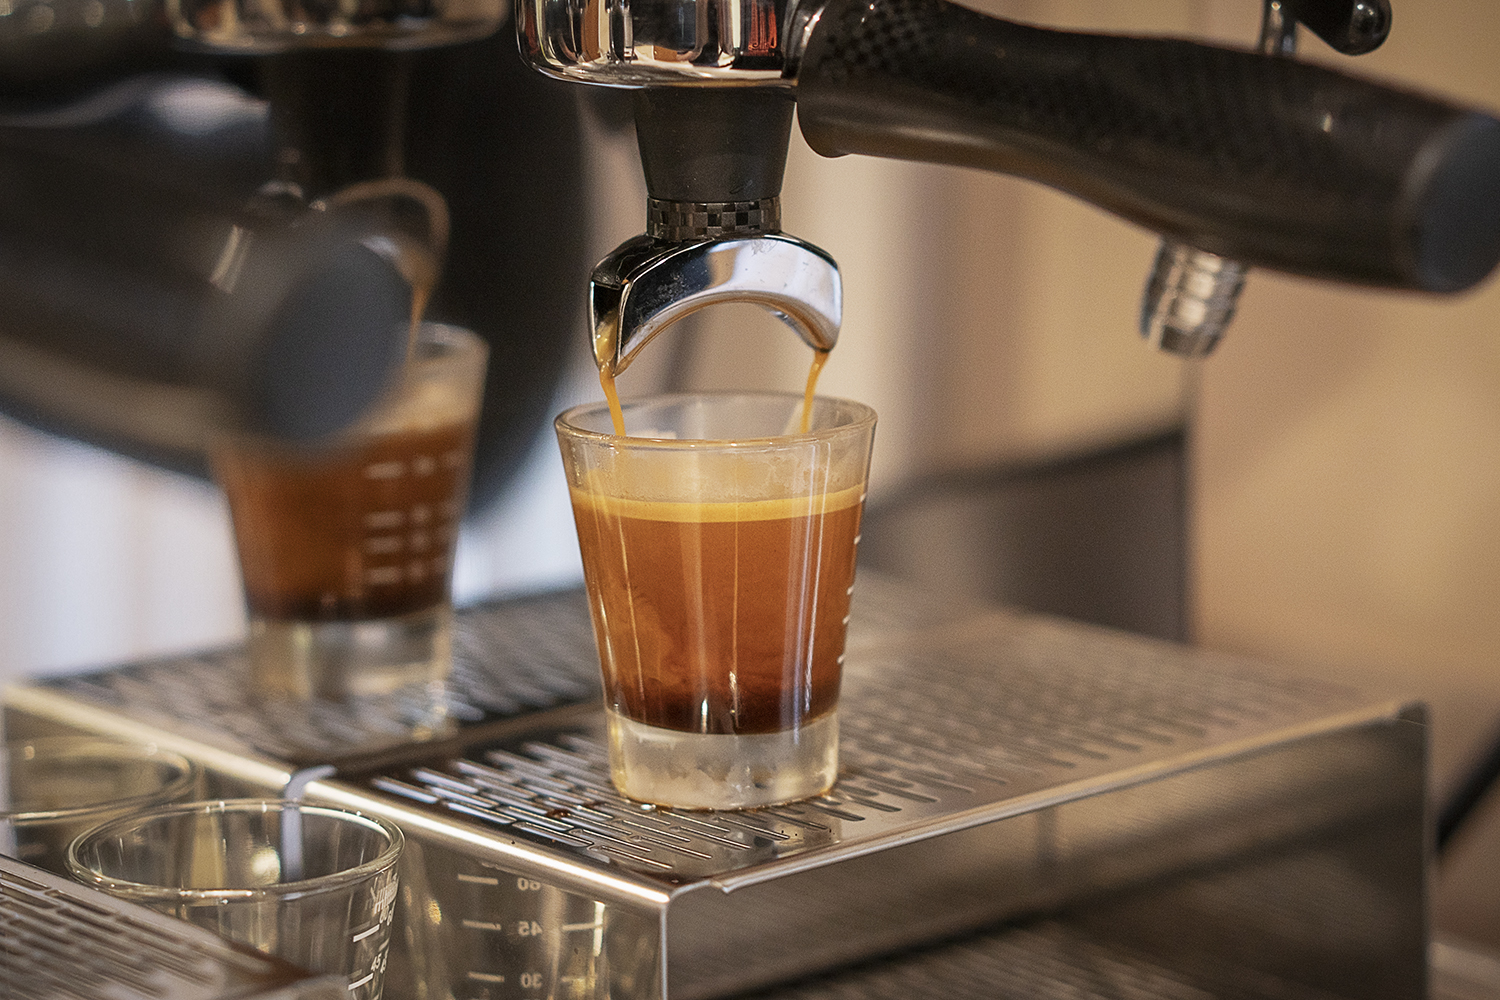 Flint, MI - Friday, June 15, 2018: A fresh shot of espresso pours into a shot glass at Chill Coffee Cafe.